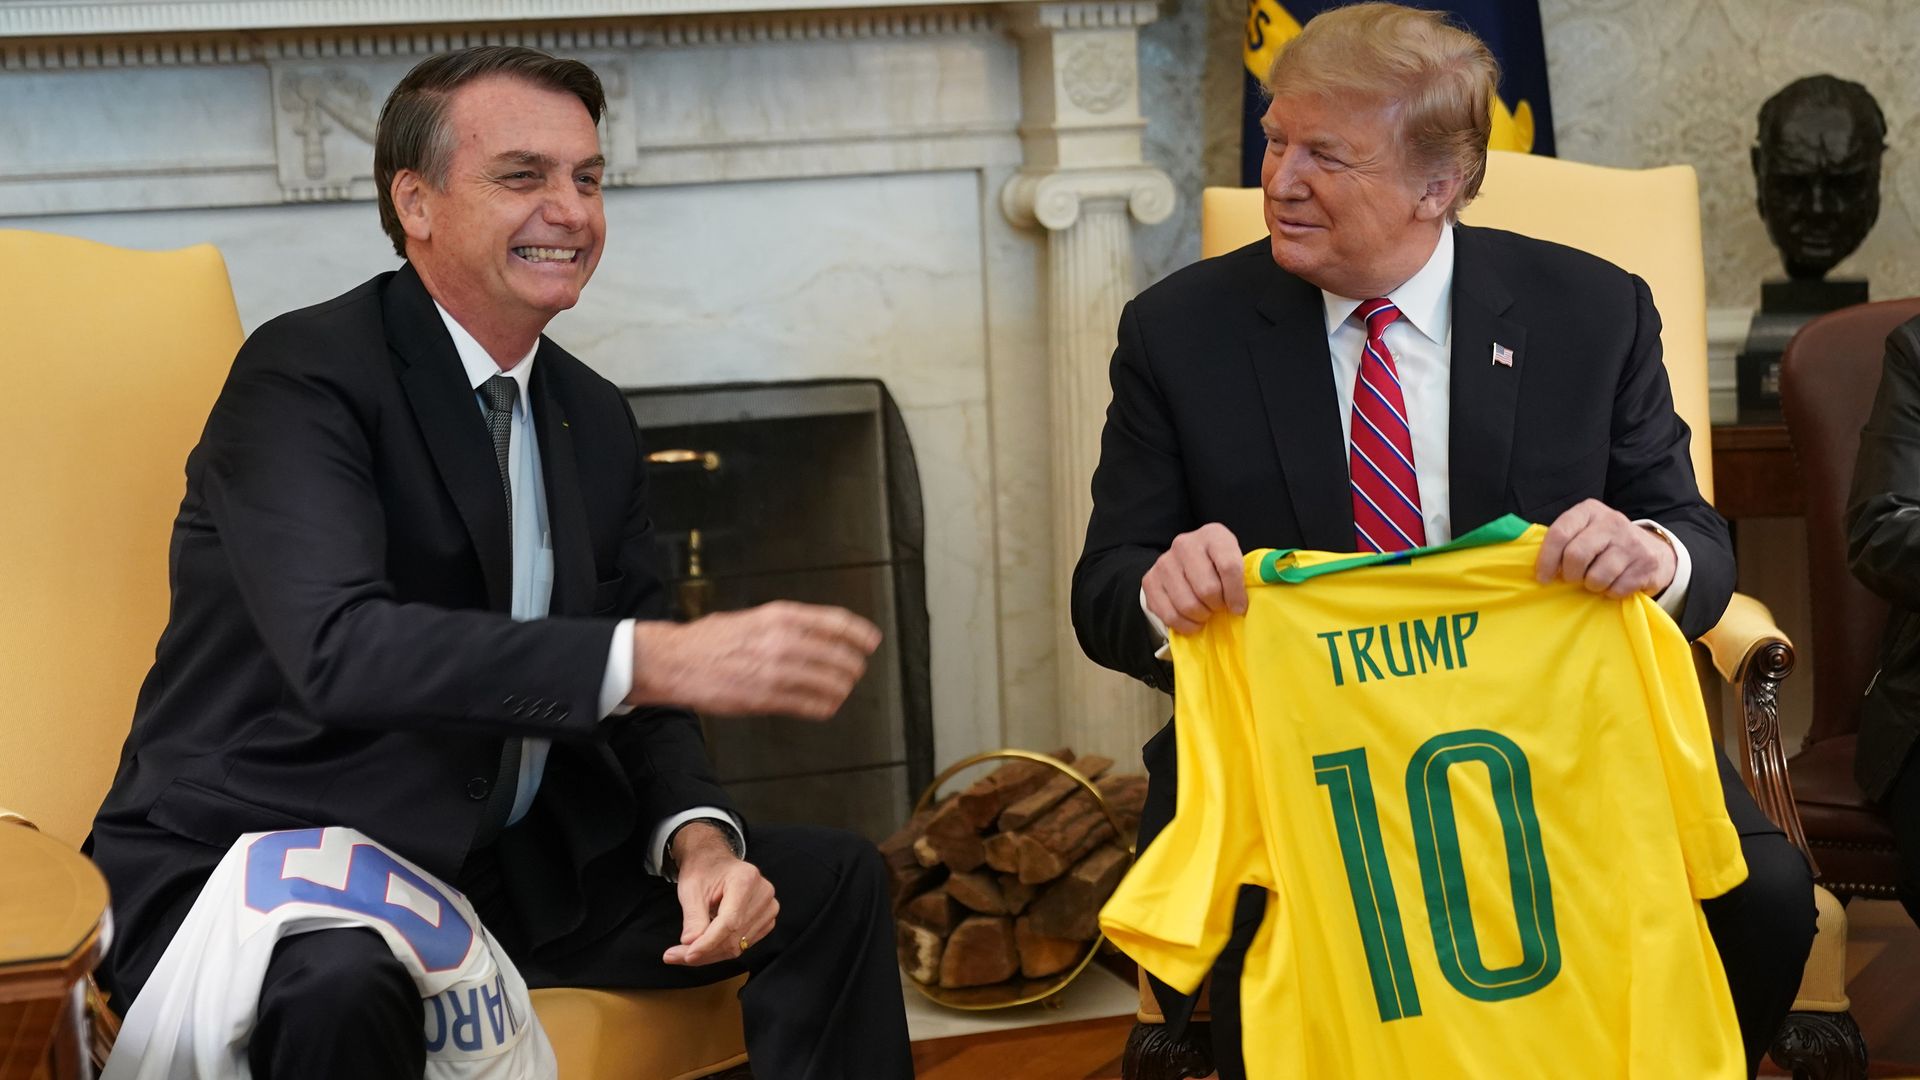 President Trump holds up a yellow sports jersey with the letter ten on it and his name, while sitting next to the Brazilian president in the Oval Office.